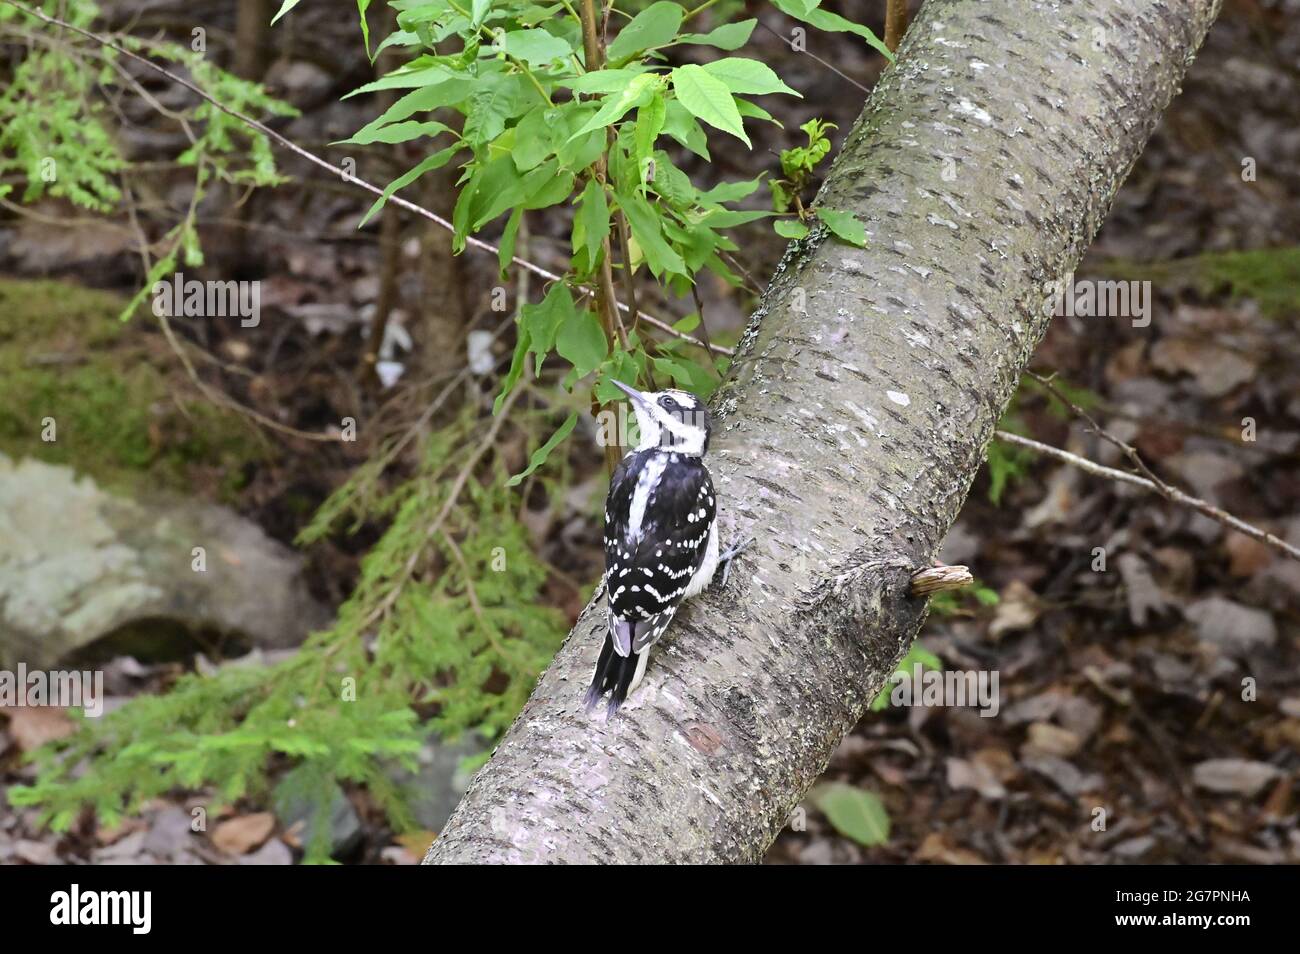 A female woodpecker sits on a branch in a wilderness forest in Canada. Stock Photo